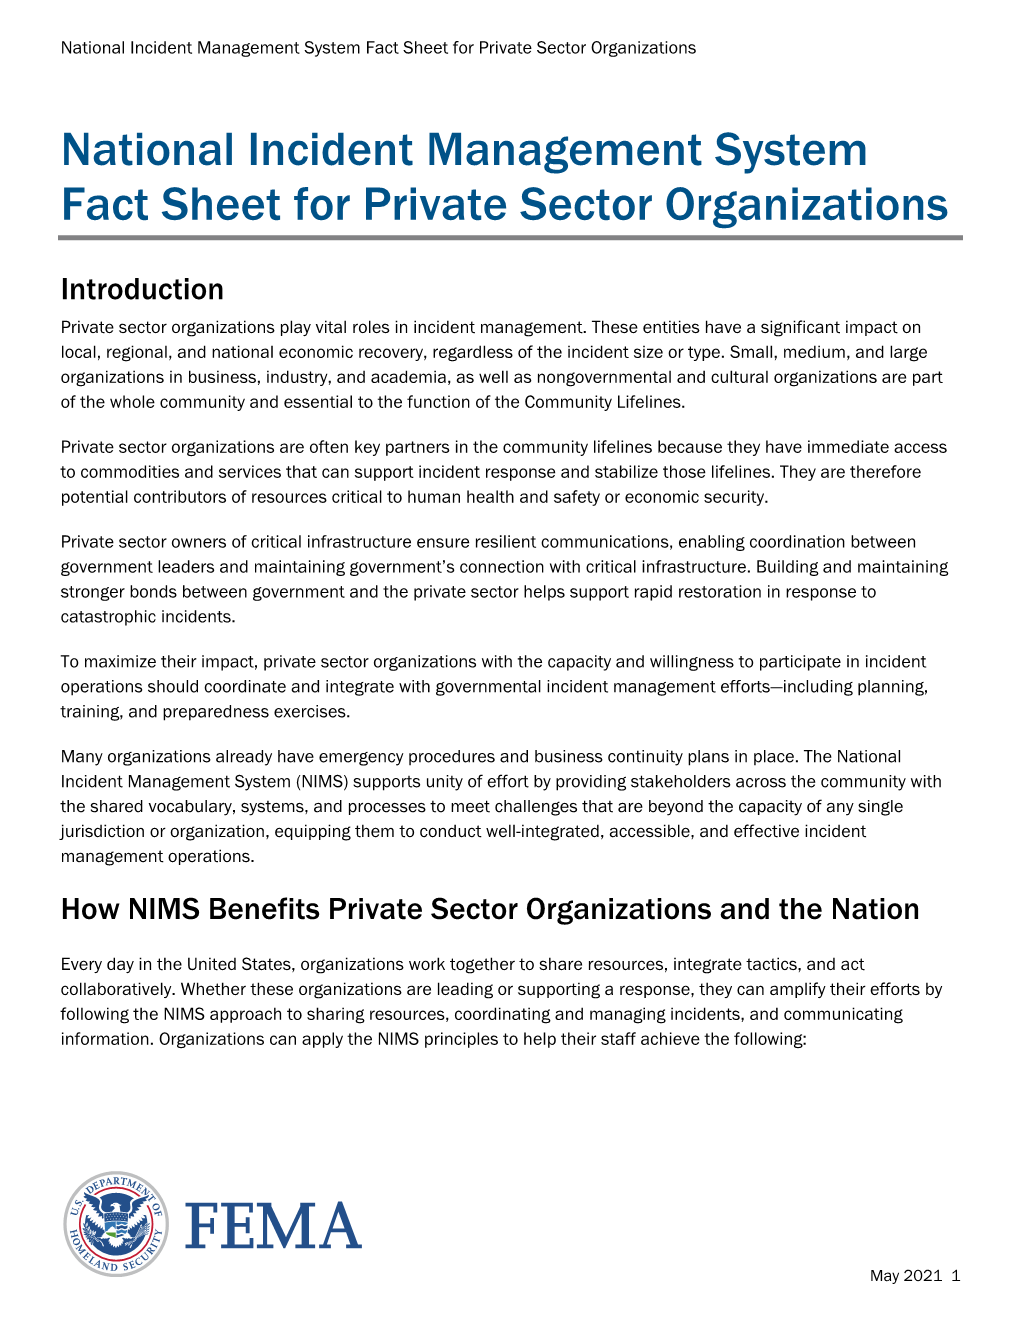 NIMS Fact Sheet for Private Sector Organizations